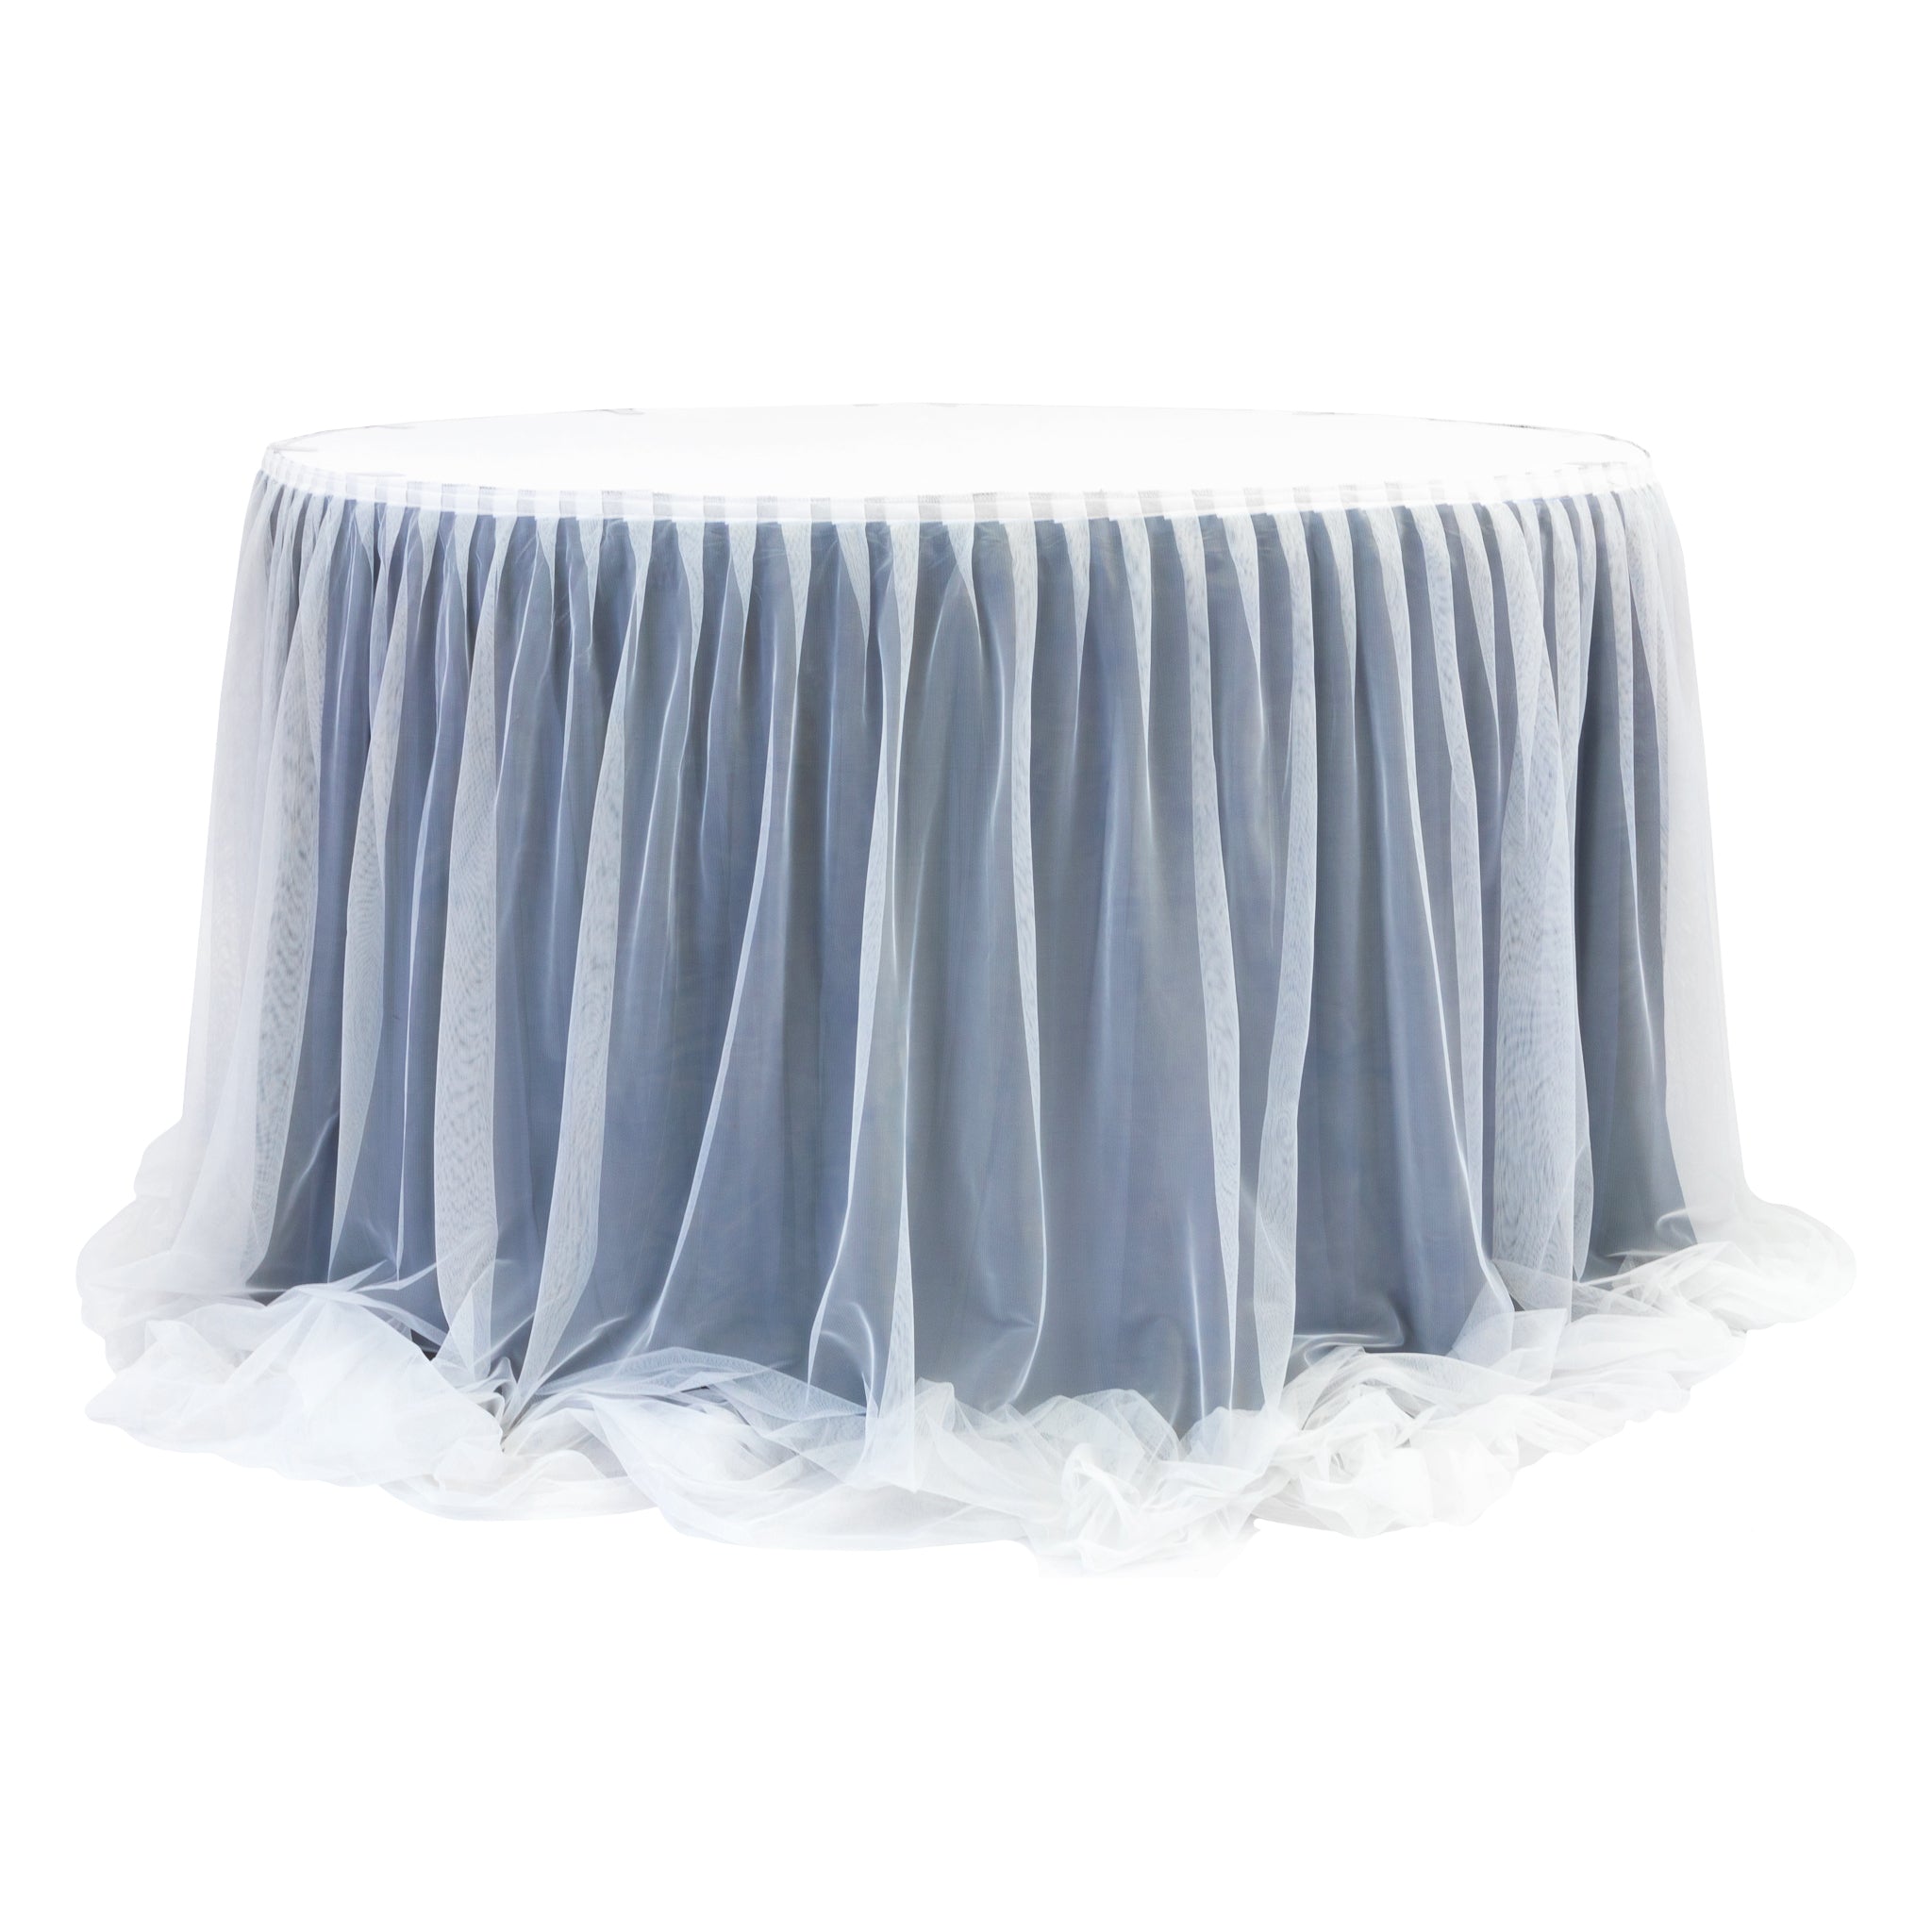 Chiffon Tulle Table Skirt Extra Long 57 X 14ft Navy Blue And White Cv Linens 9662